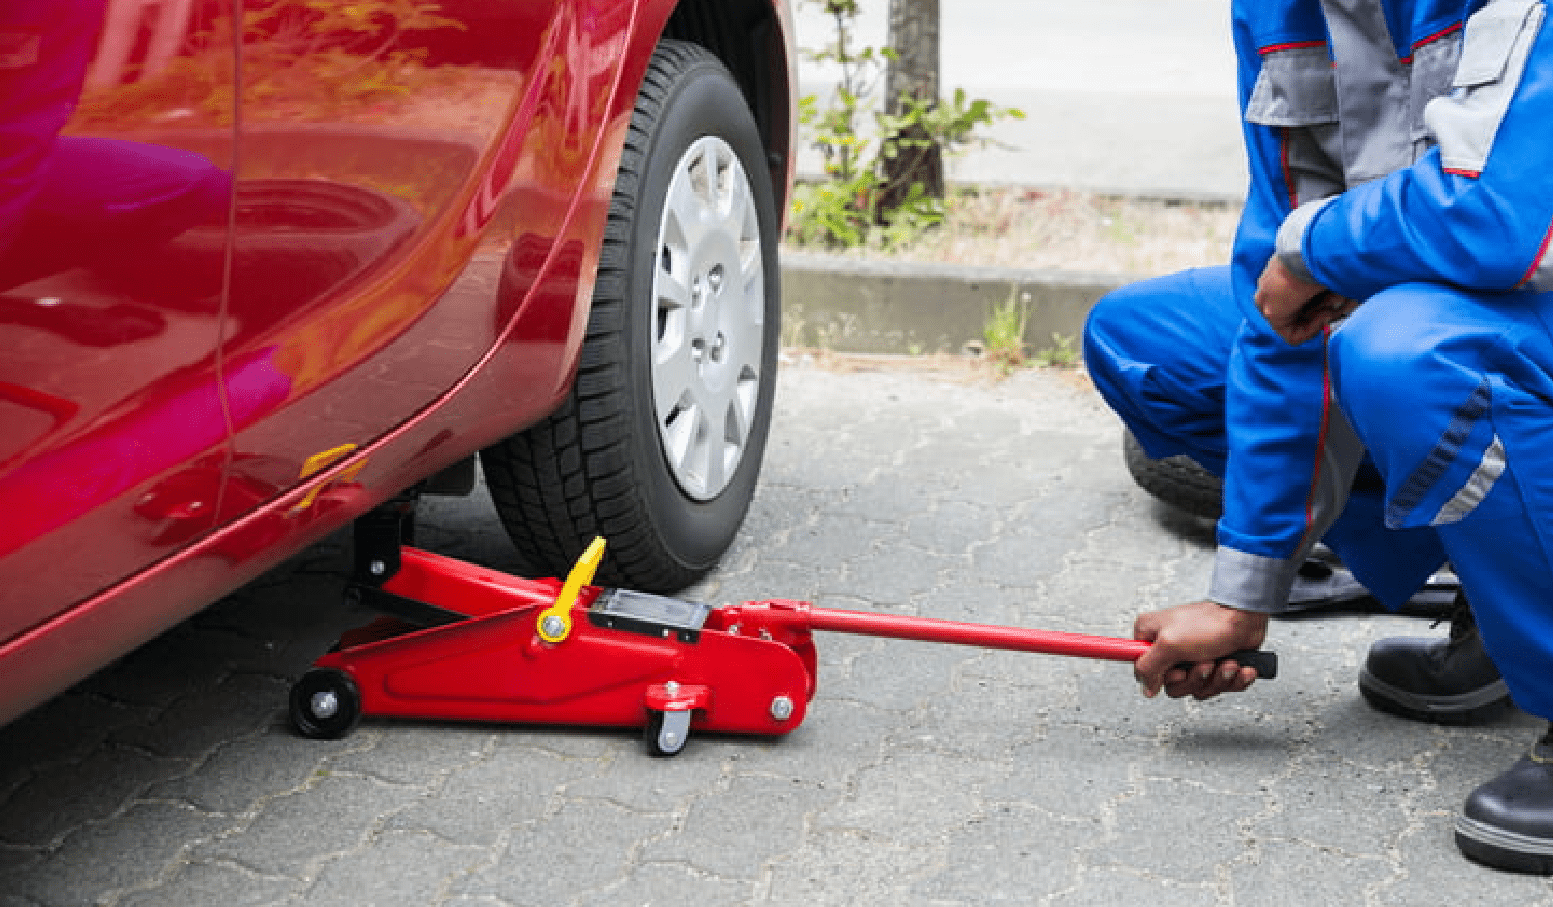 How to Jack Up a Car step by step|Parking the car|Using the jack to lift the car|Making use of the jack stands|Lowering the car